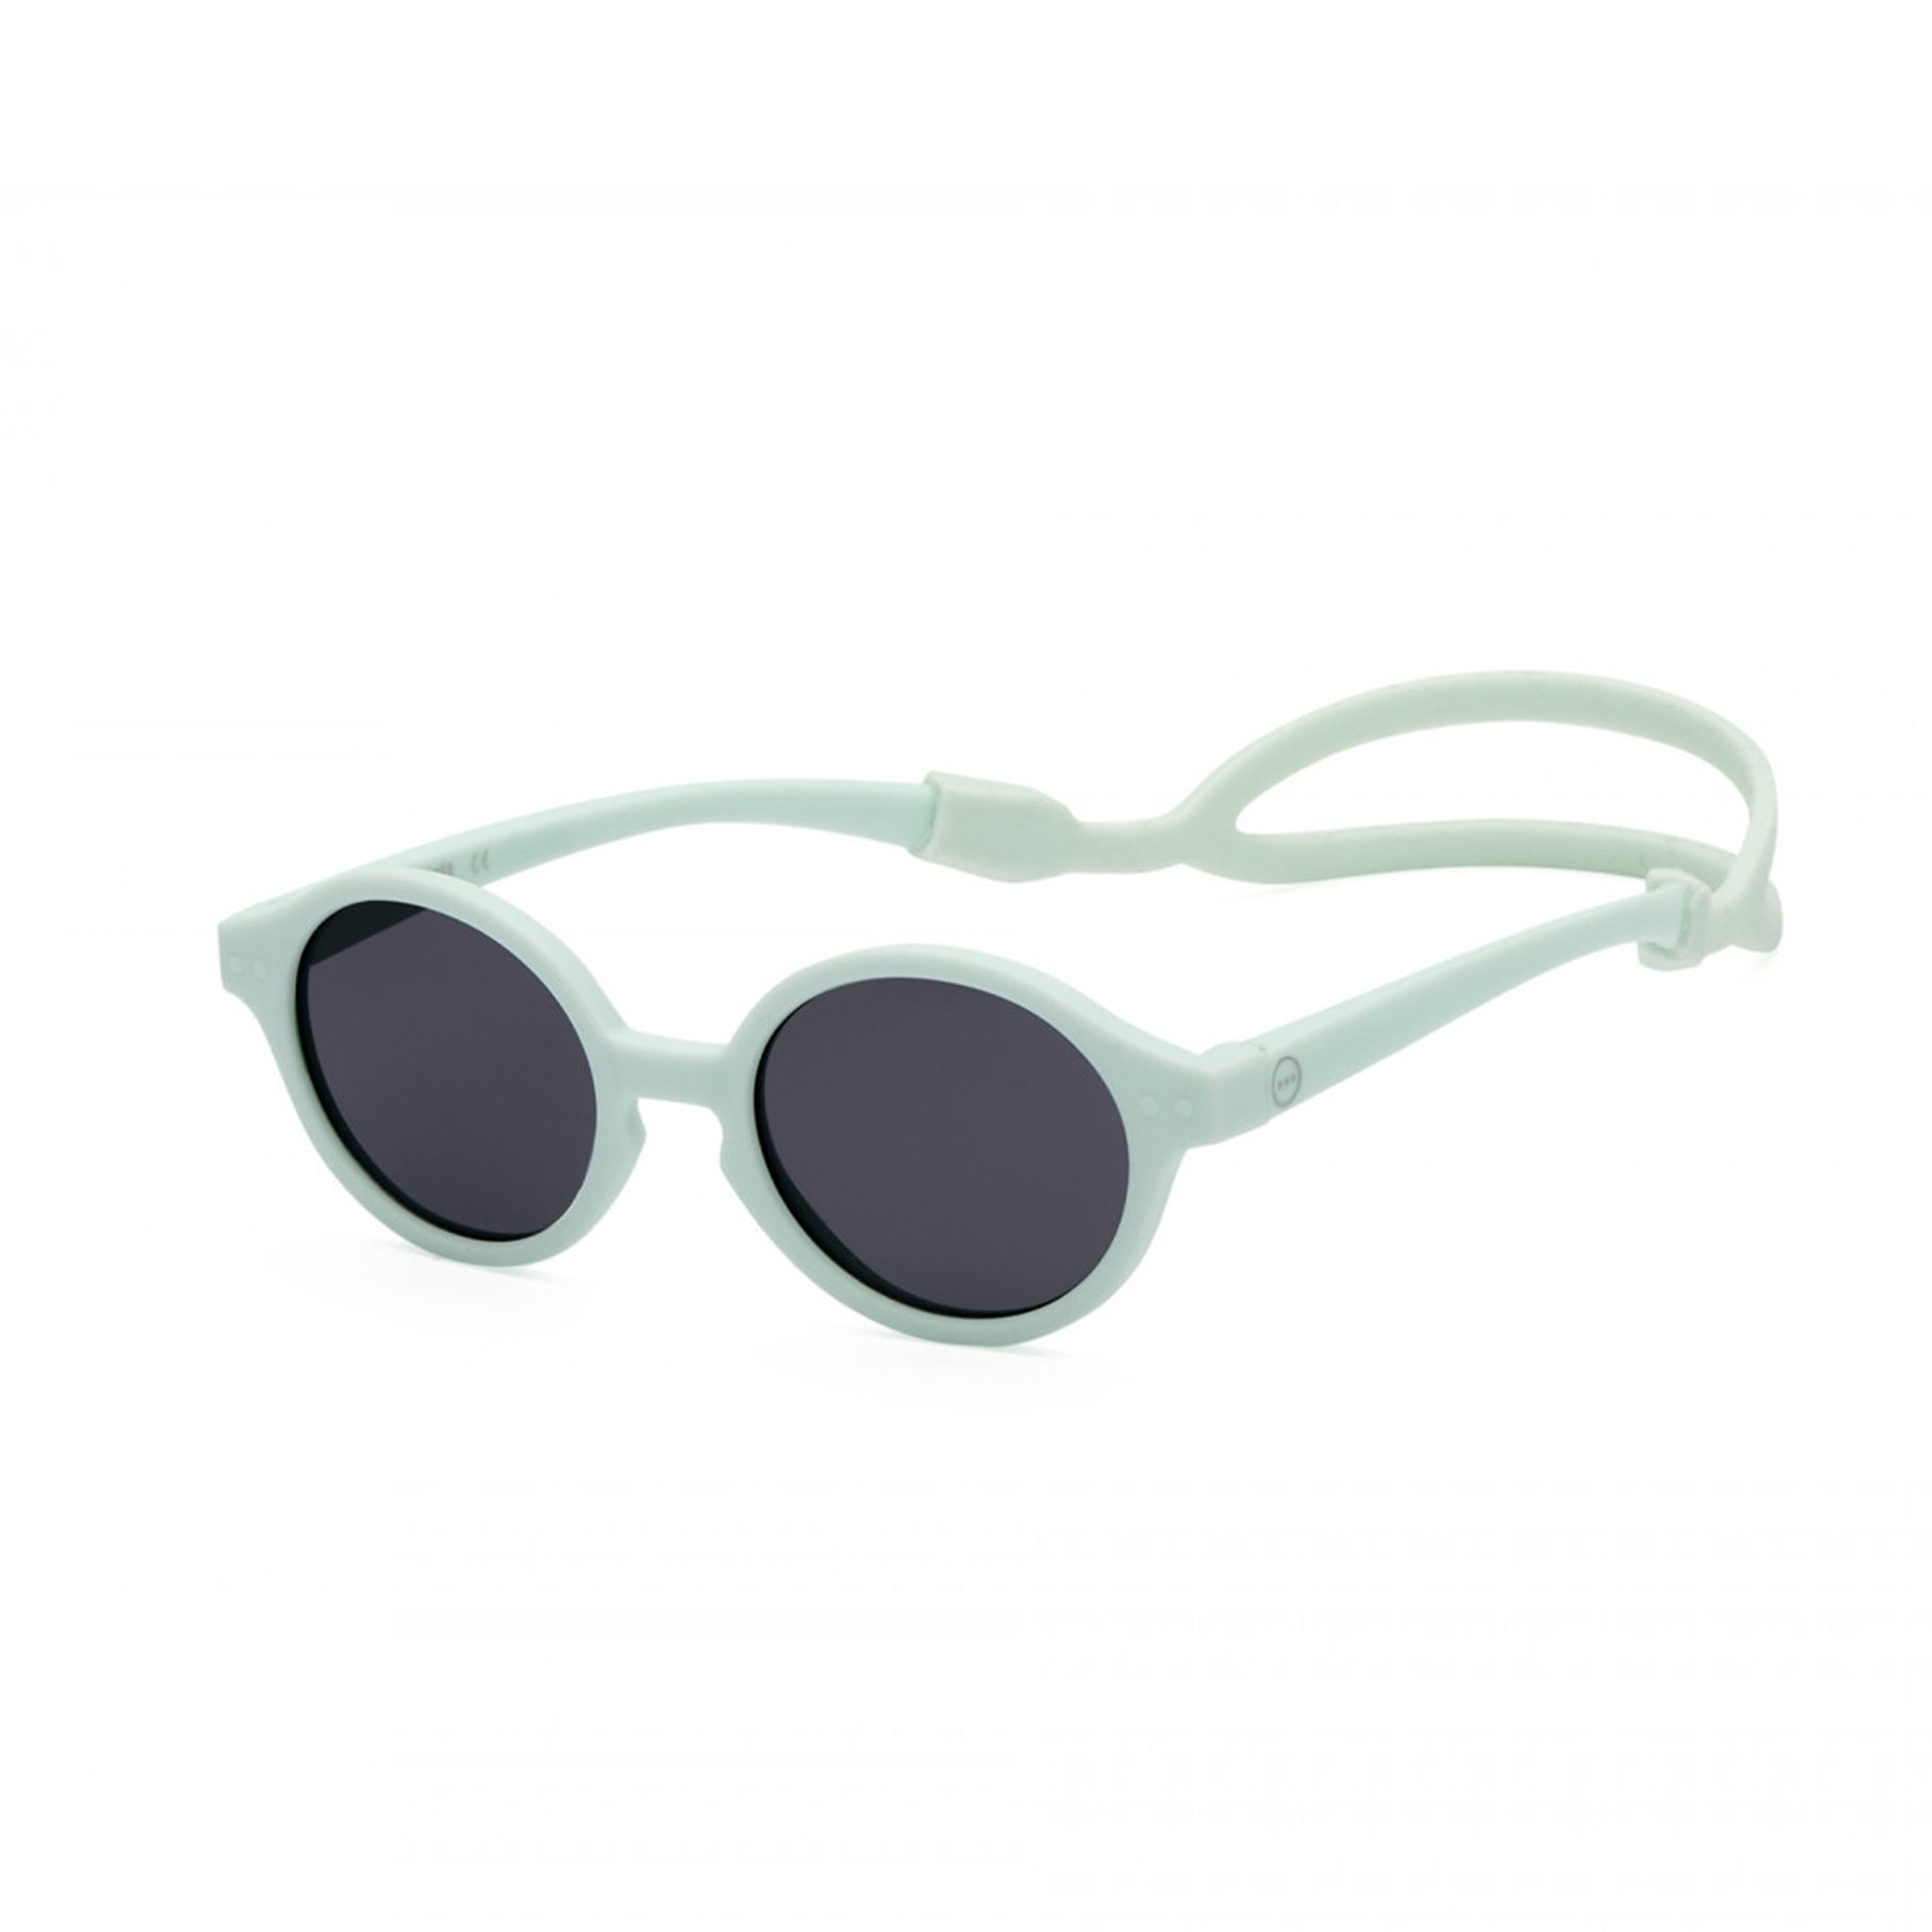 Side view of baby blue sunglasses